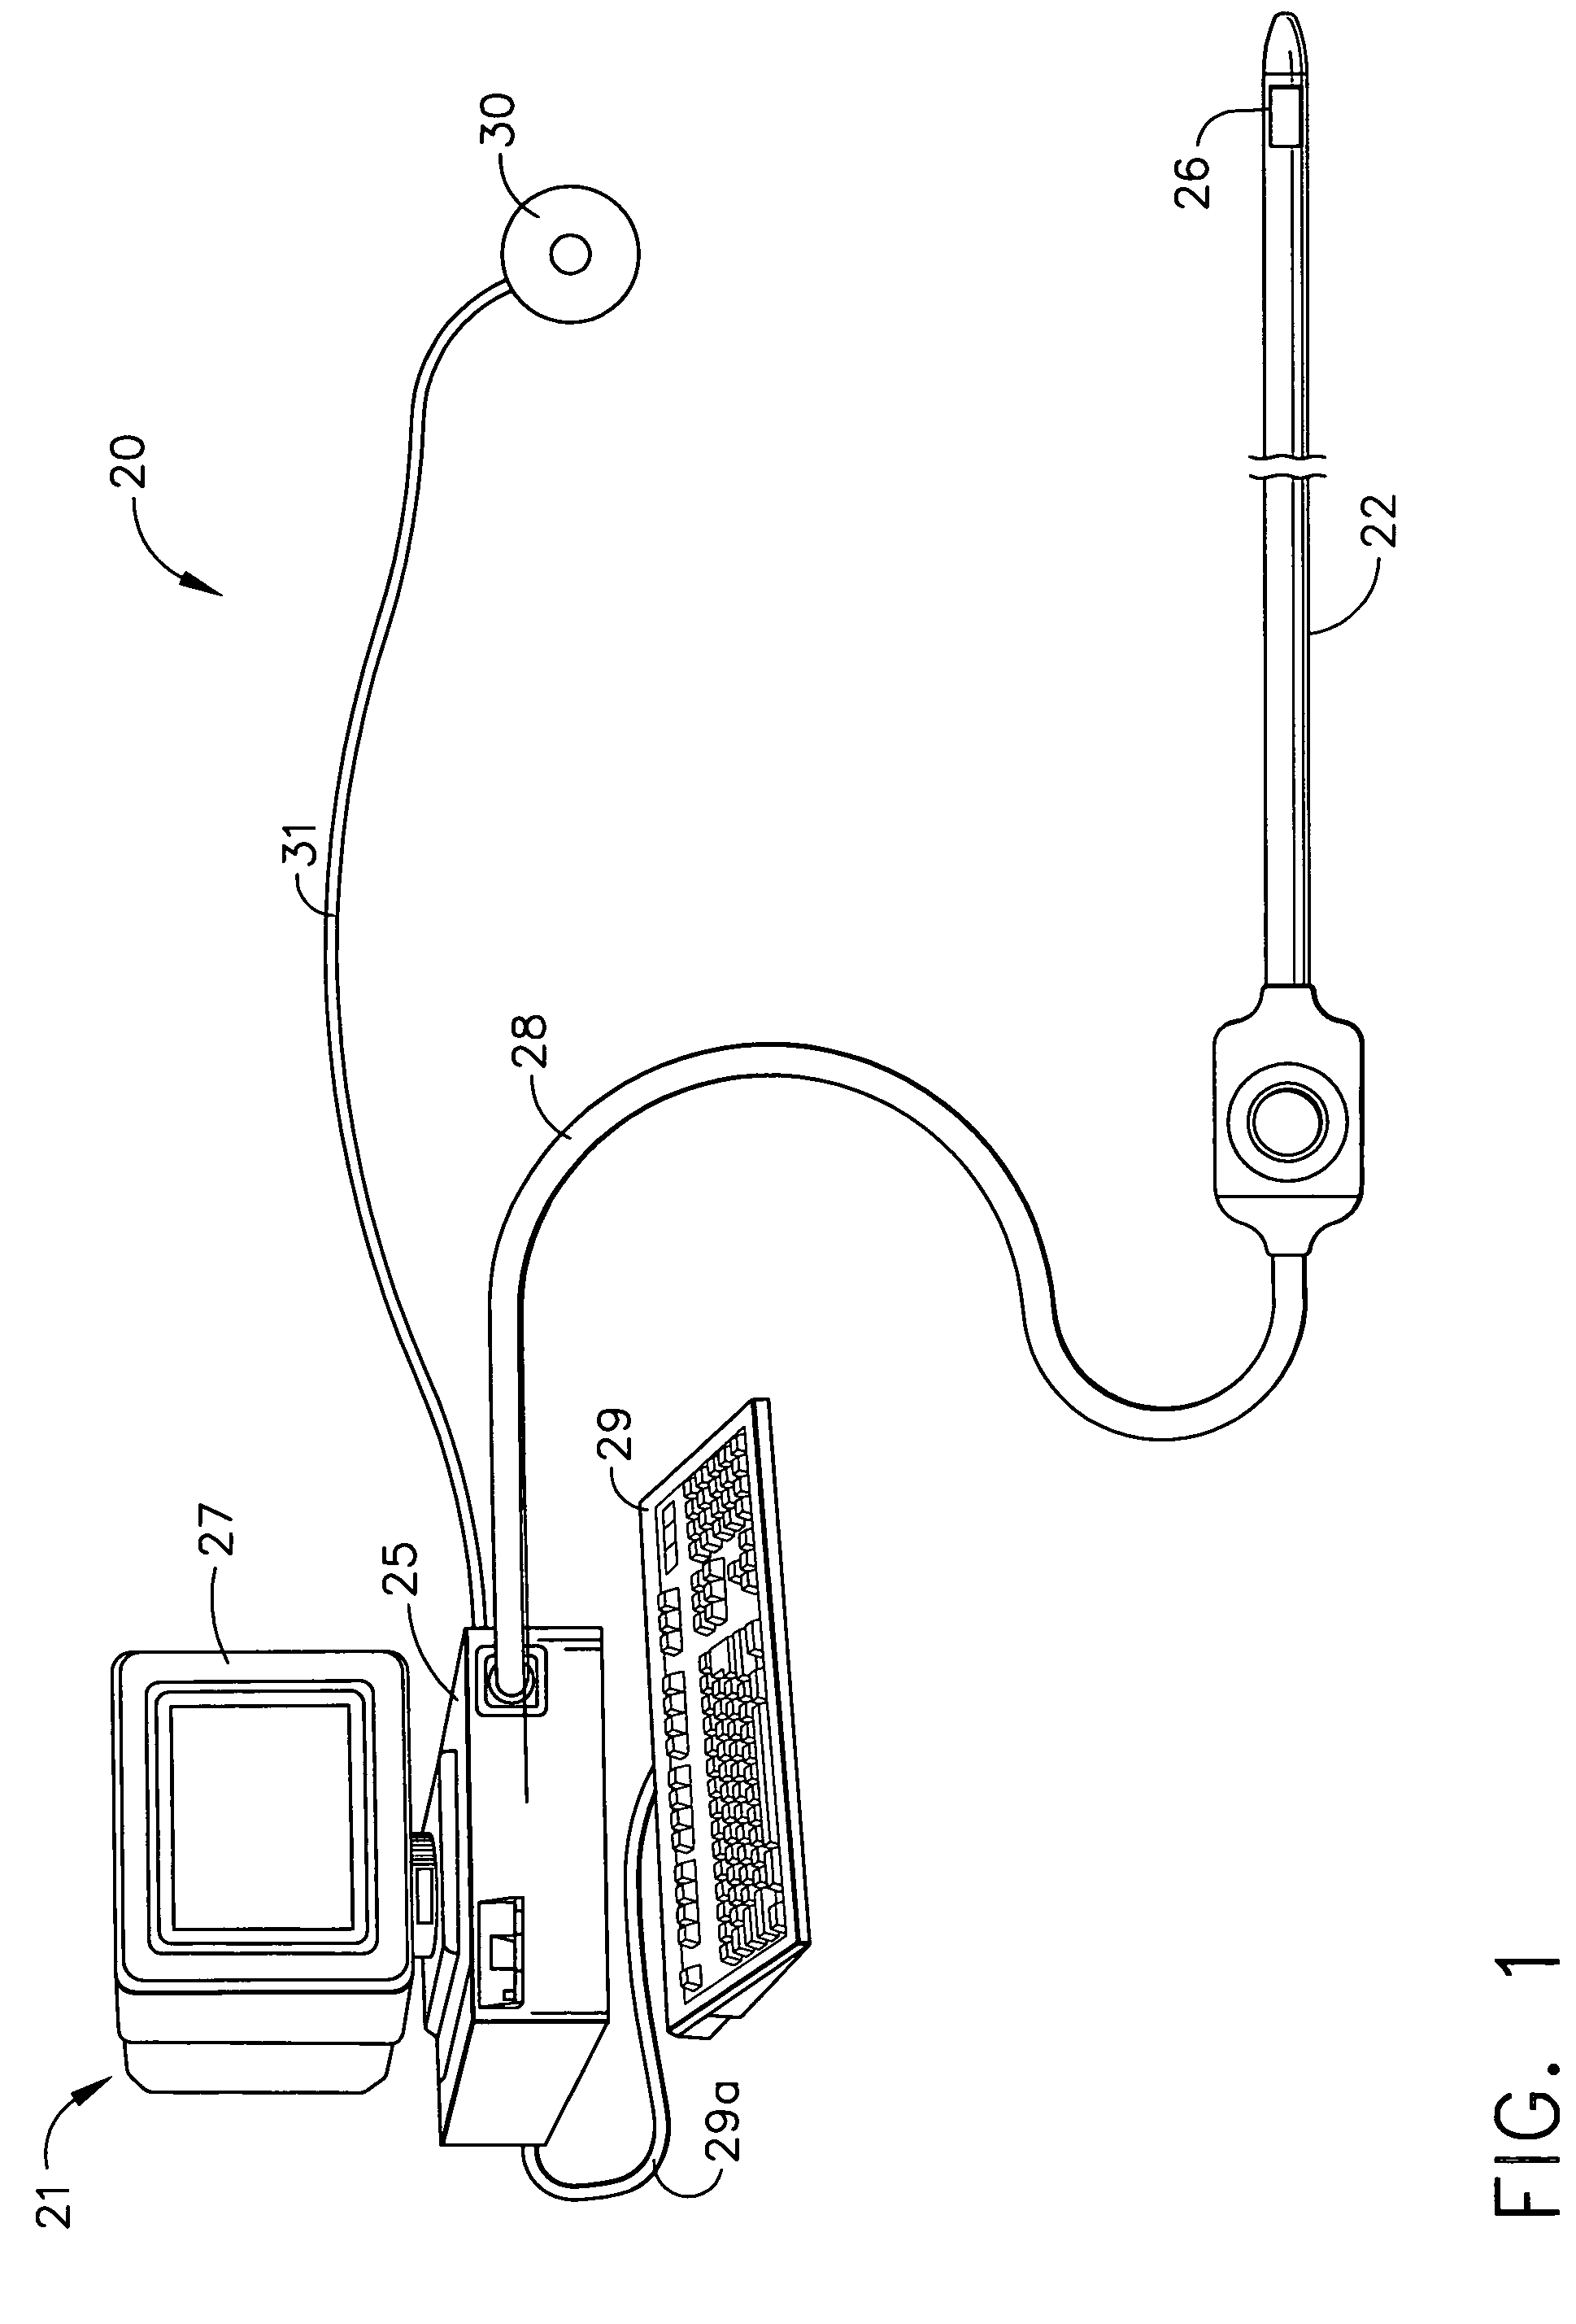 Medical system calibration with static metal compensation